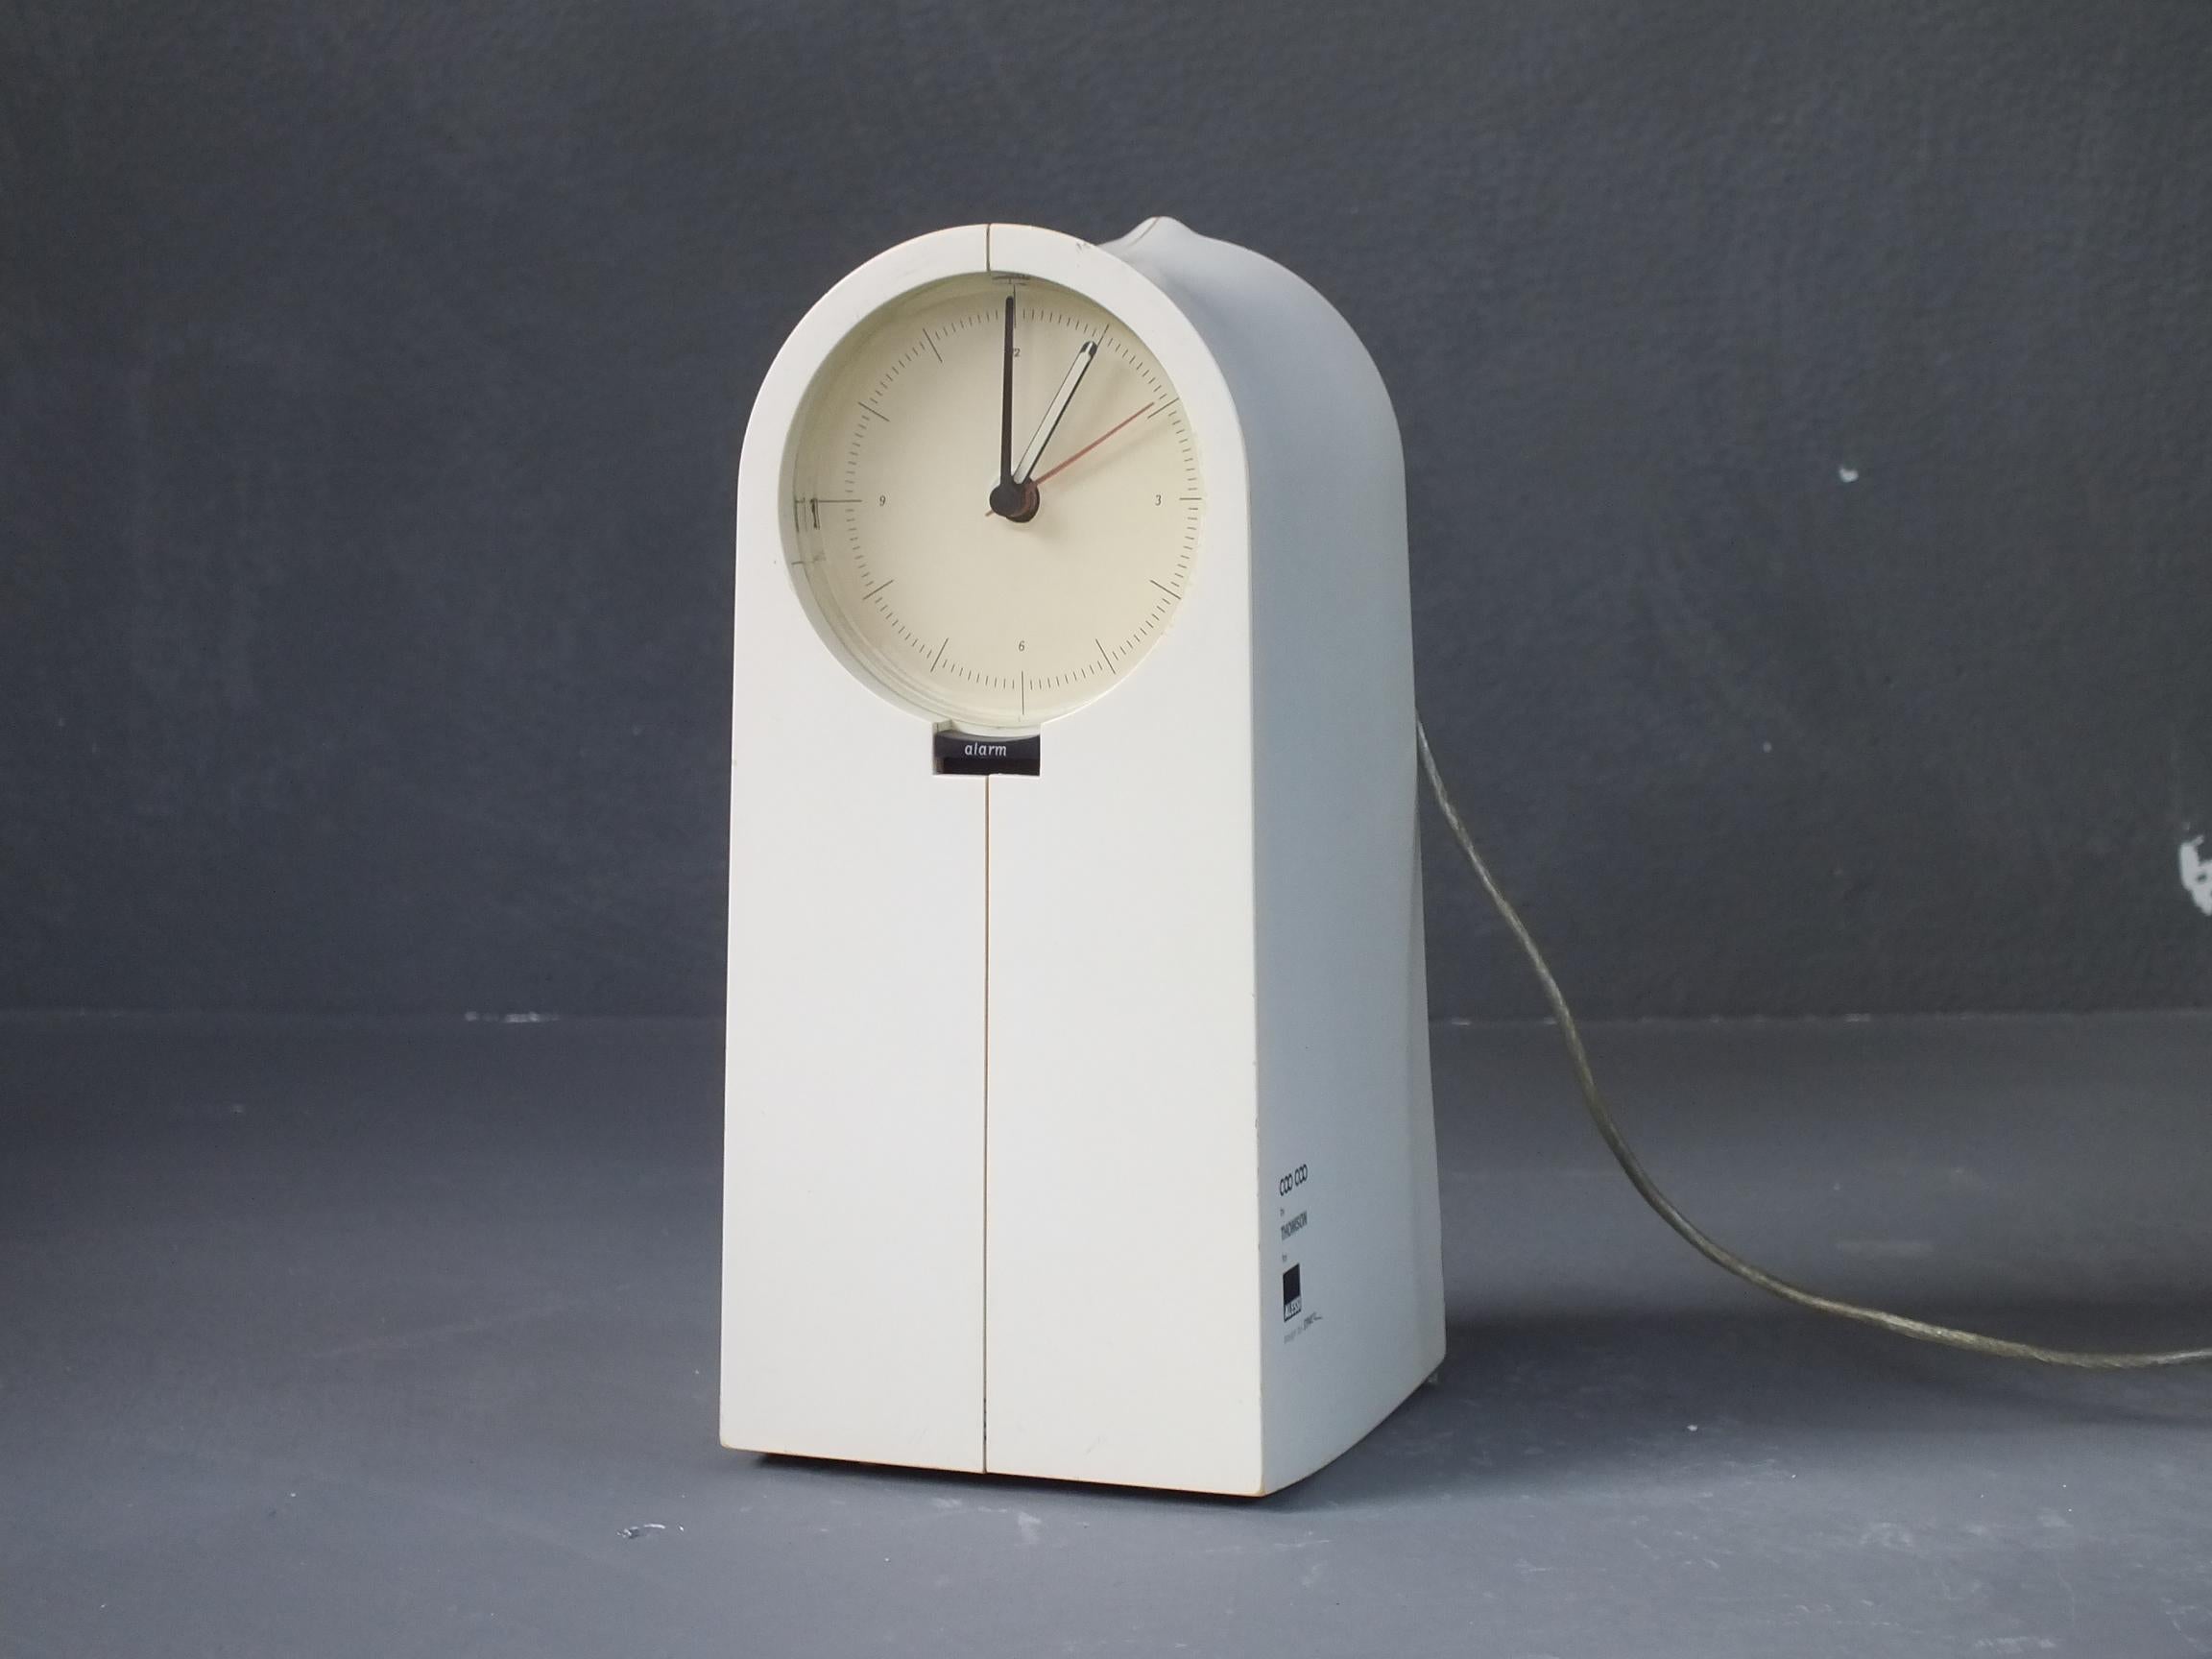 Plastic Thomson Prod. Alessi Clock Radio Coo Coo by Pilippe Starck Design Year 1994 For Sale